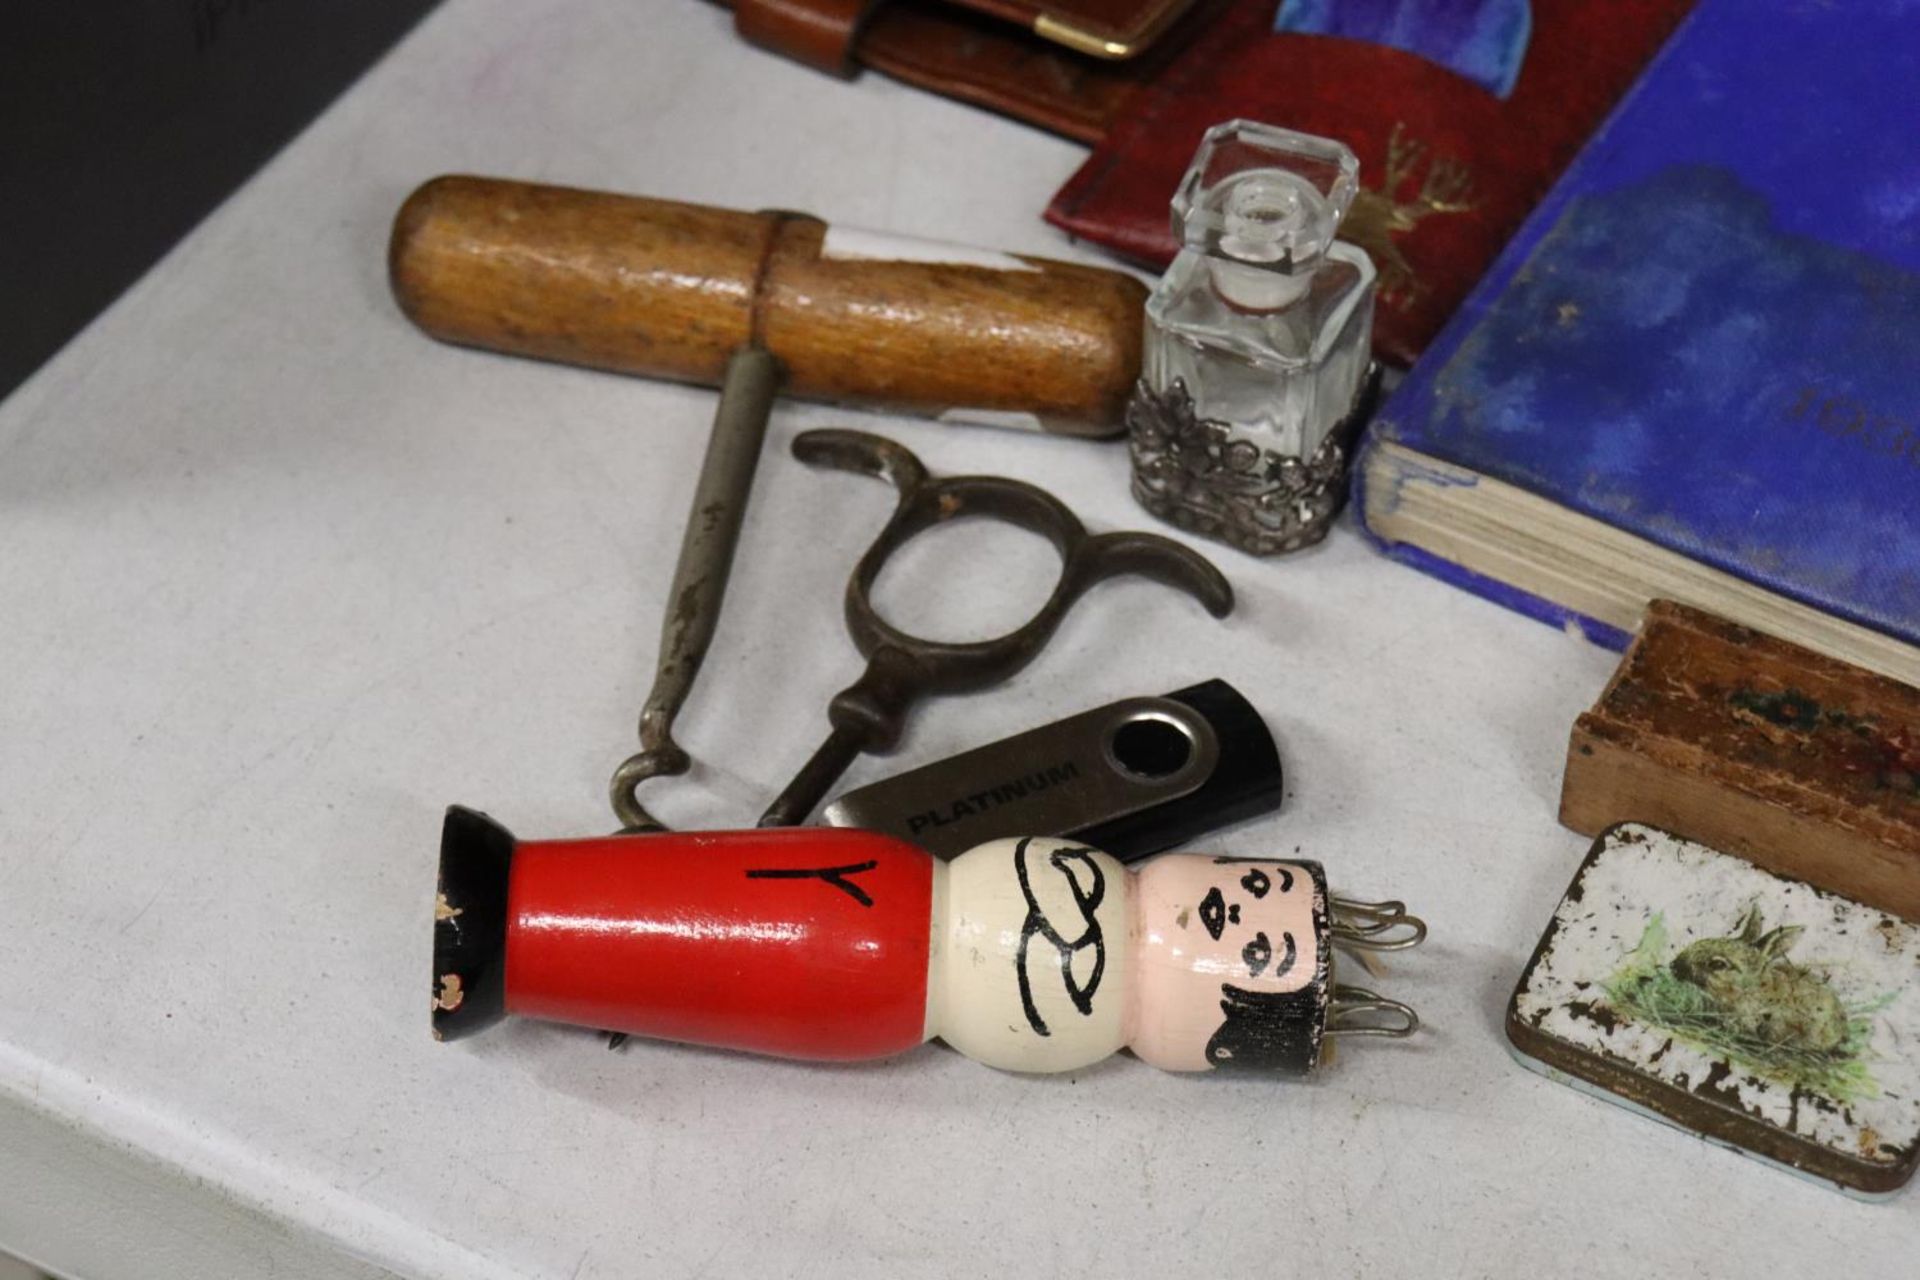 A MIXED LOT TO INCLUDE AN OLD I-PHONE, I-PHONE BOXES, SPECTACLES IN A CASE, BOTTLE OPENERS, DARTS, - Image 2 of 6